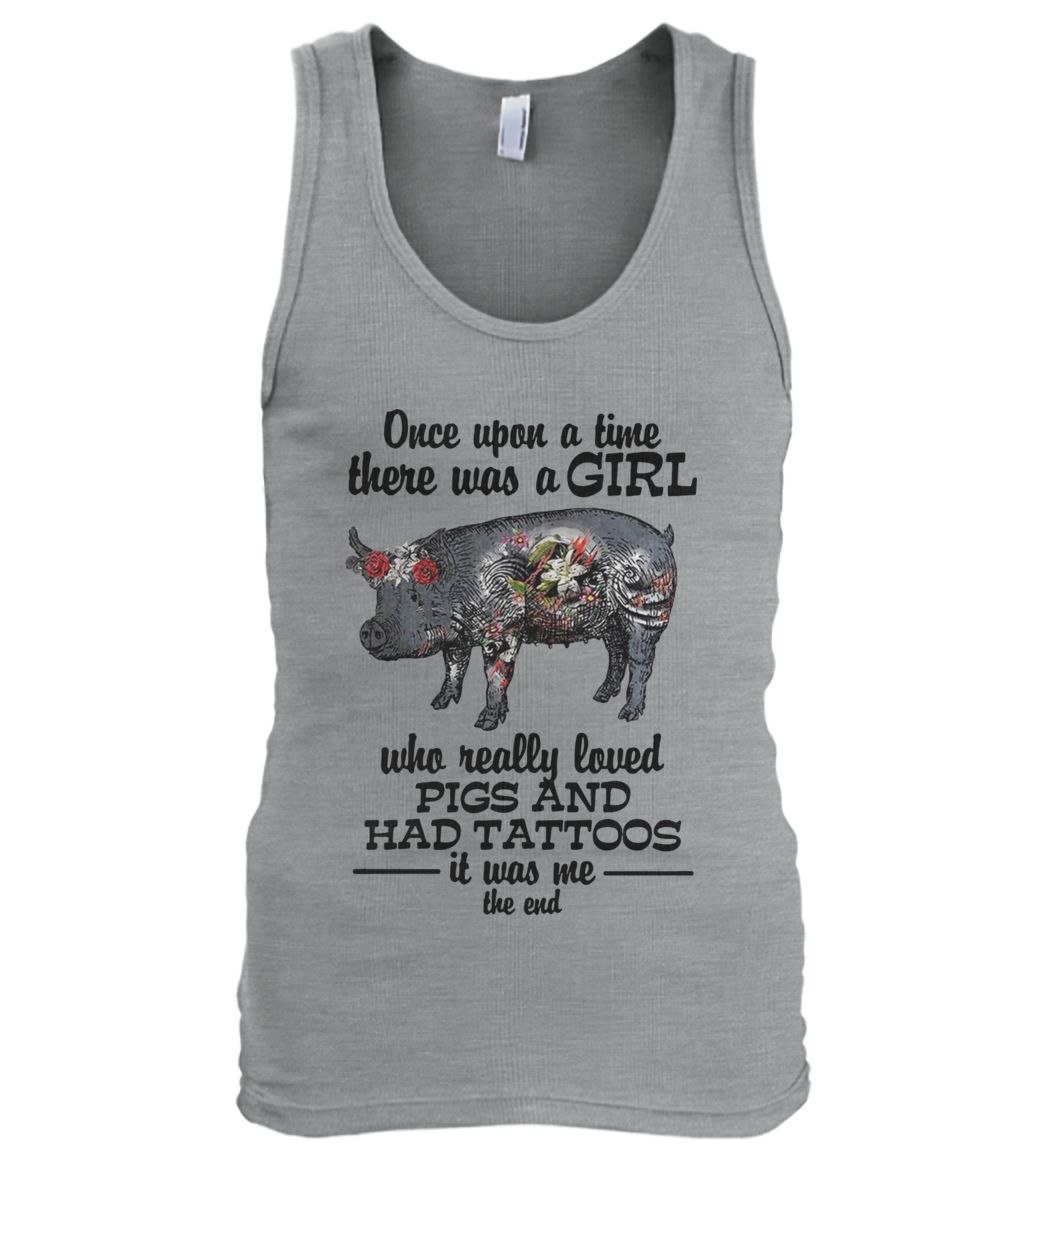 Once upon a time there was a girl who really loved pigs and had tattoos it was me men's tank top